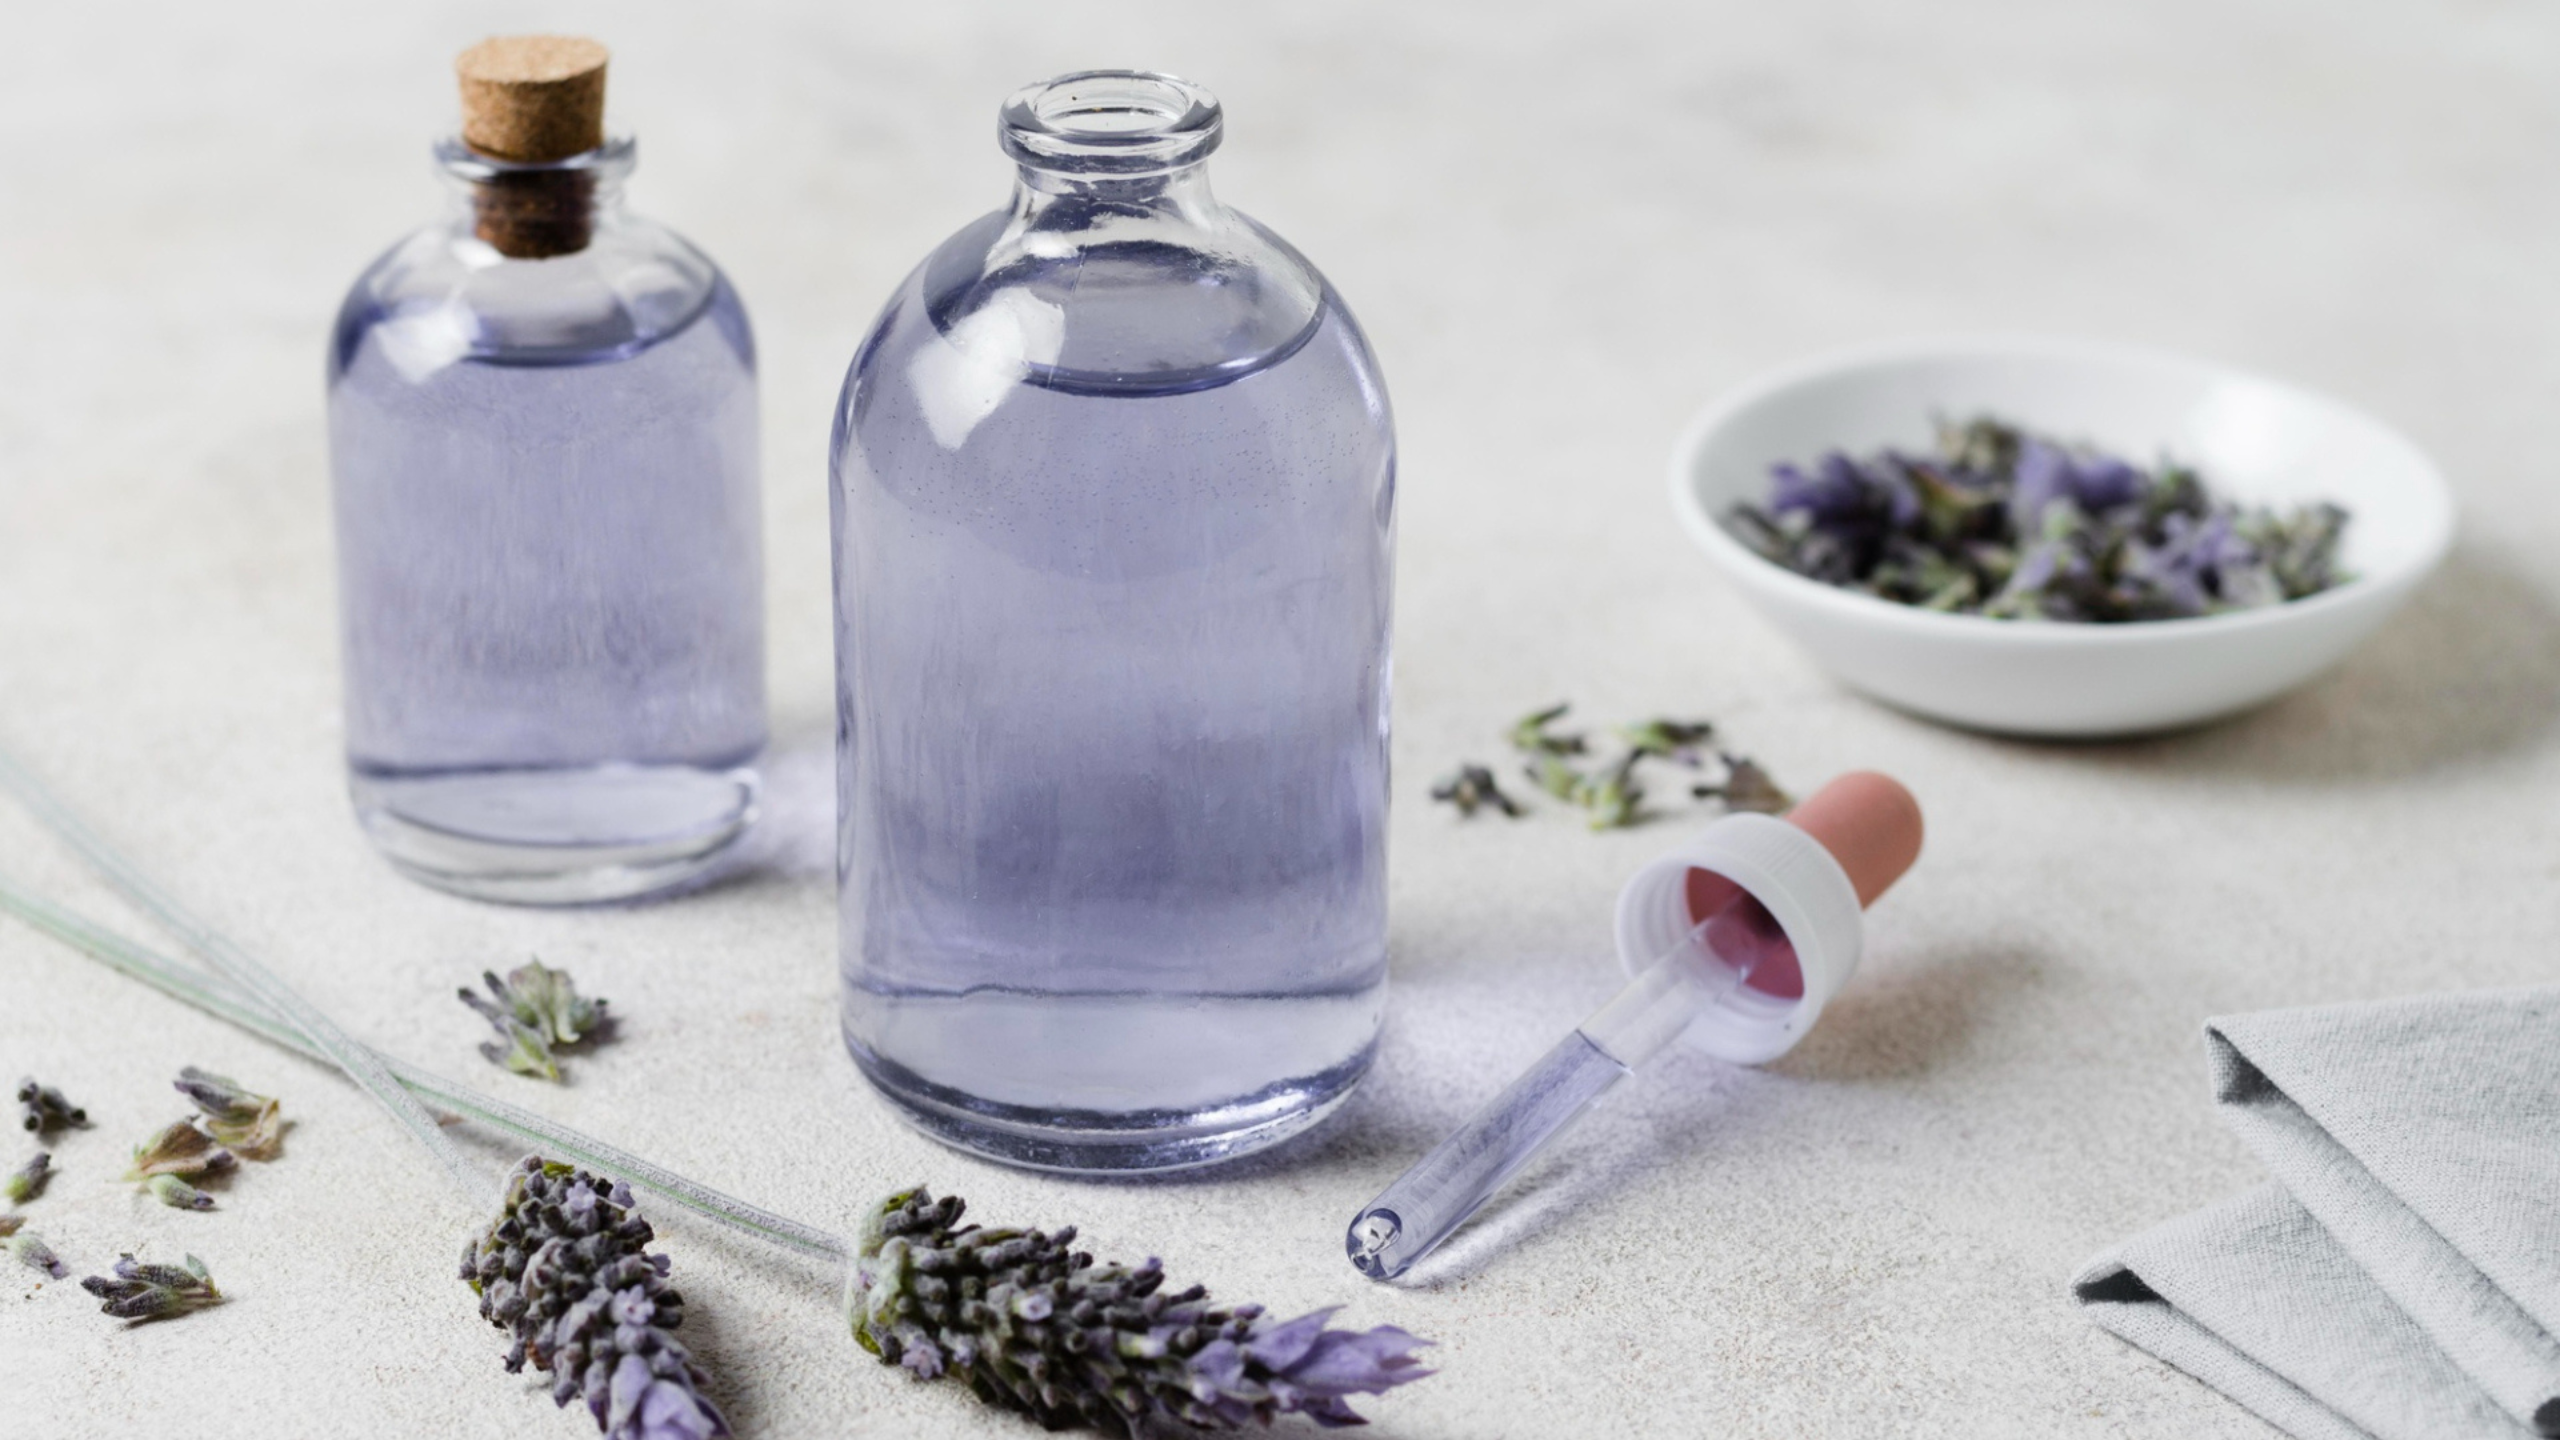 What mixes well with lavender essential oil?